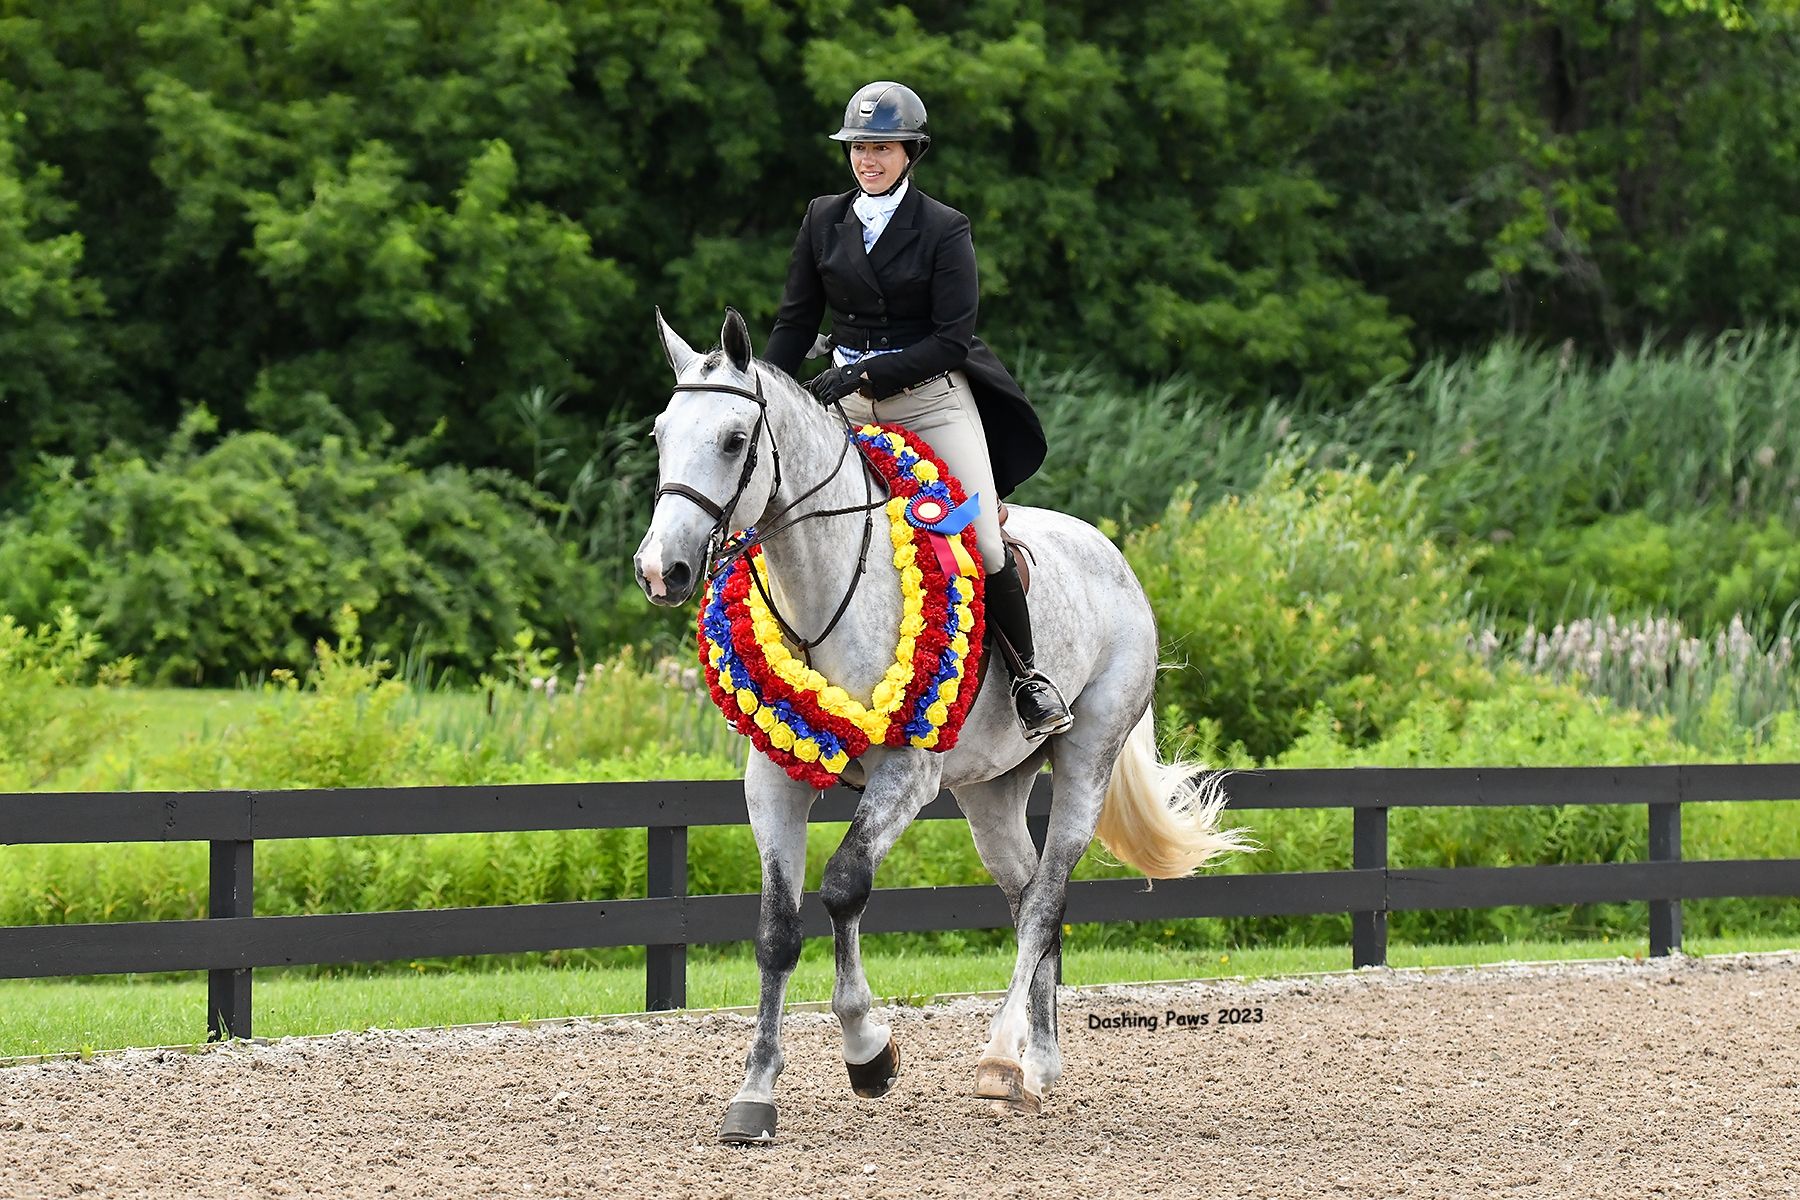 Quincy Hayes and Follow the Suit Podium USHJA the in Hunter $5,000 Derby National Top